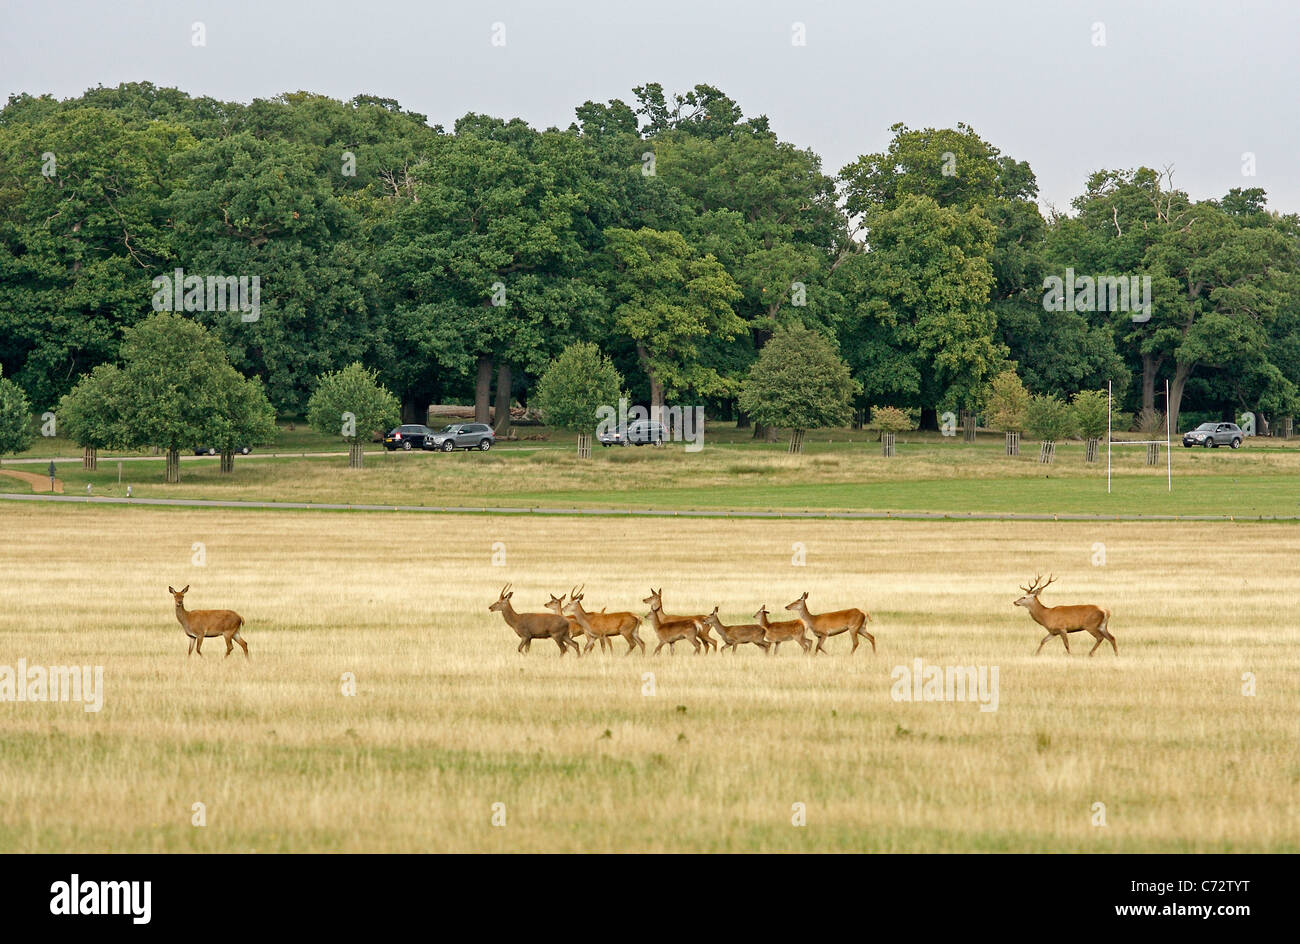 A herd of deer cross a field in Richmond Park while cars drive by in the background Stock Photo